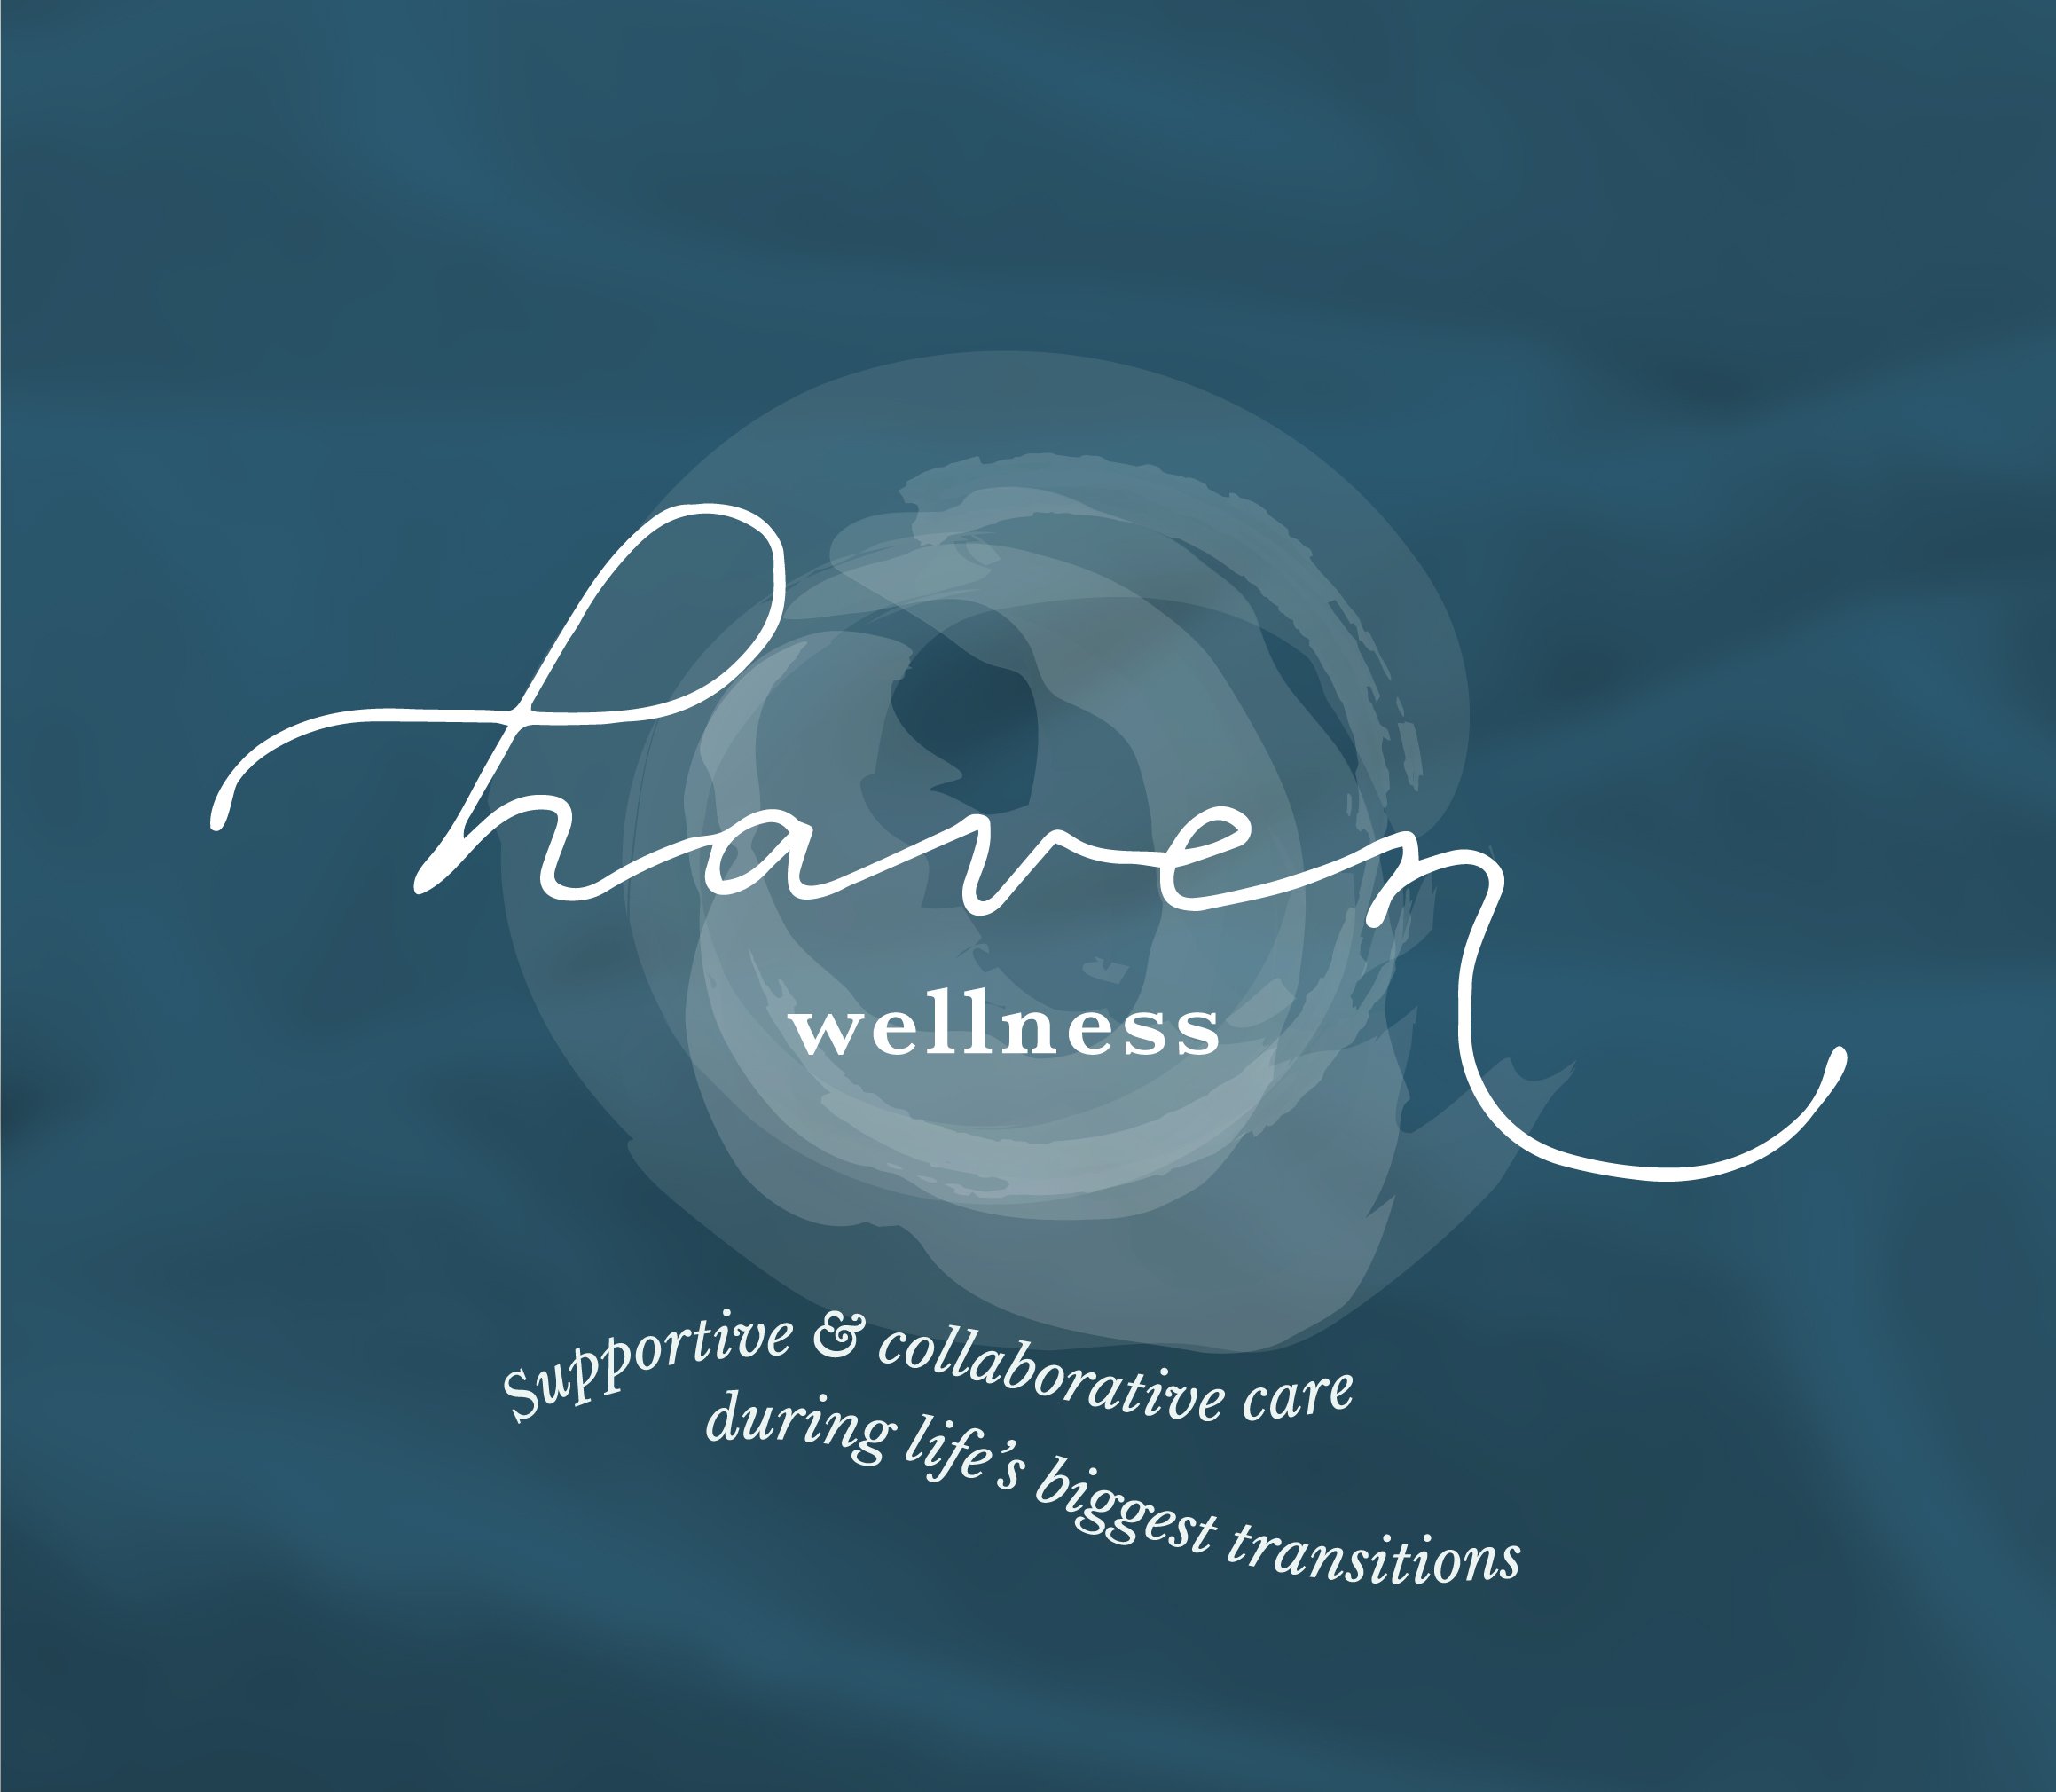  Haven logo and tagline — supportive &amp; collaborative care during life's biggest transitions. 